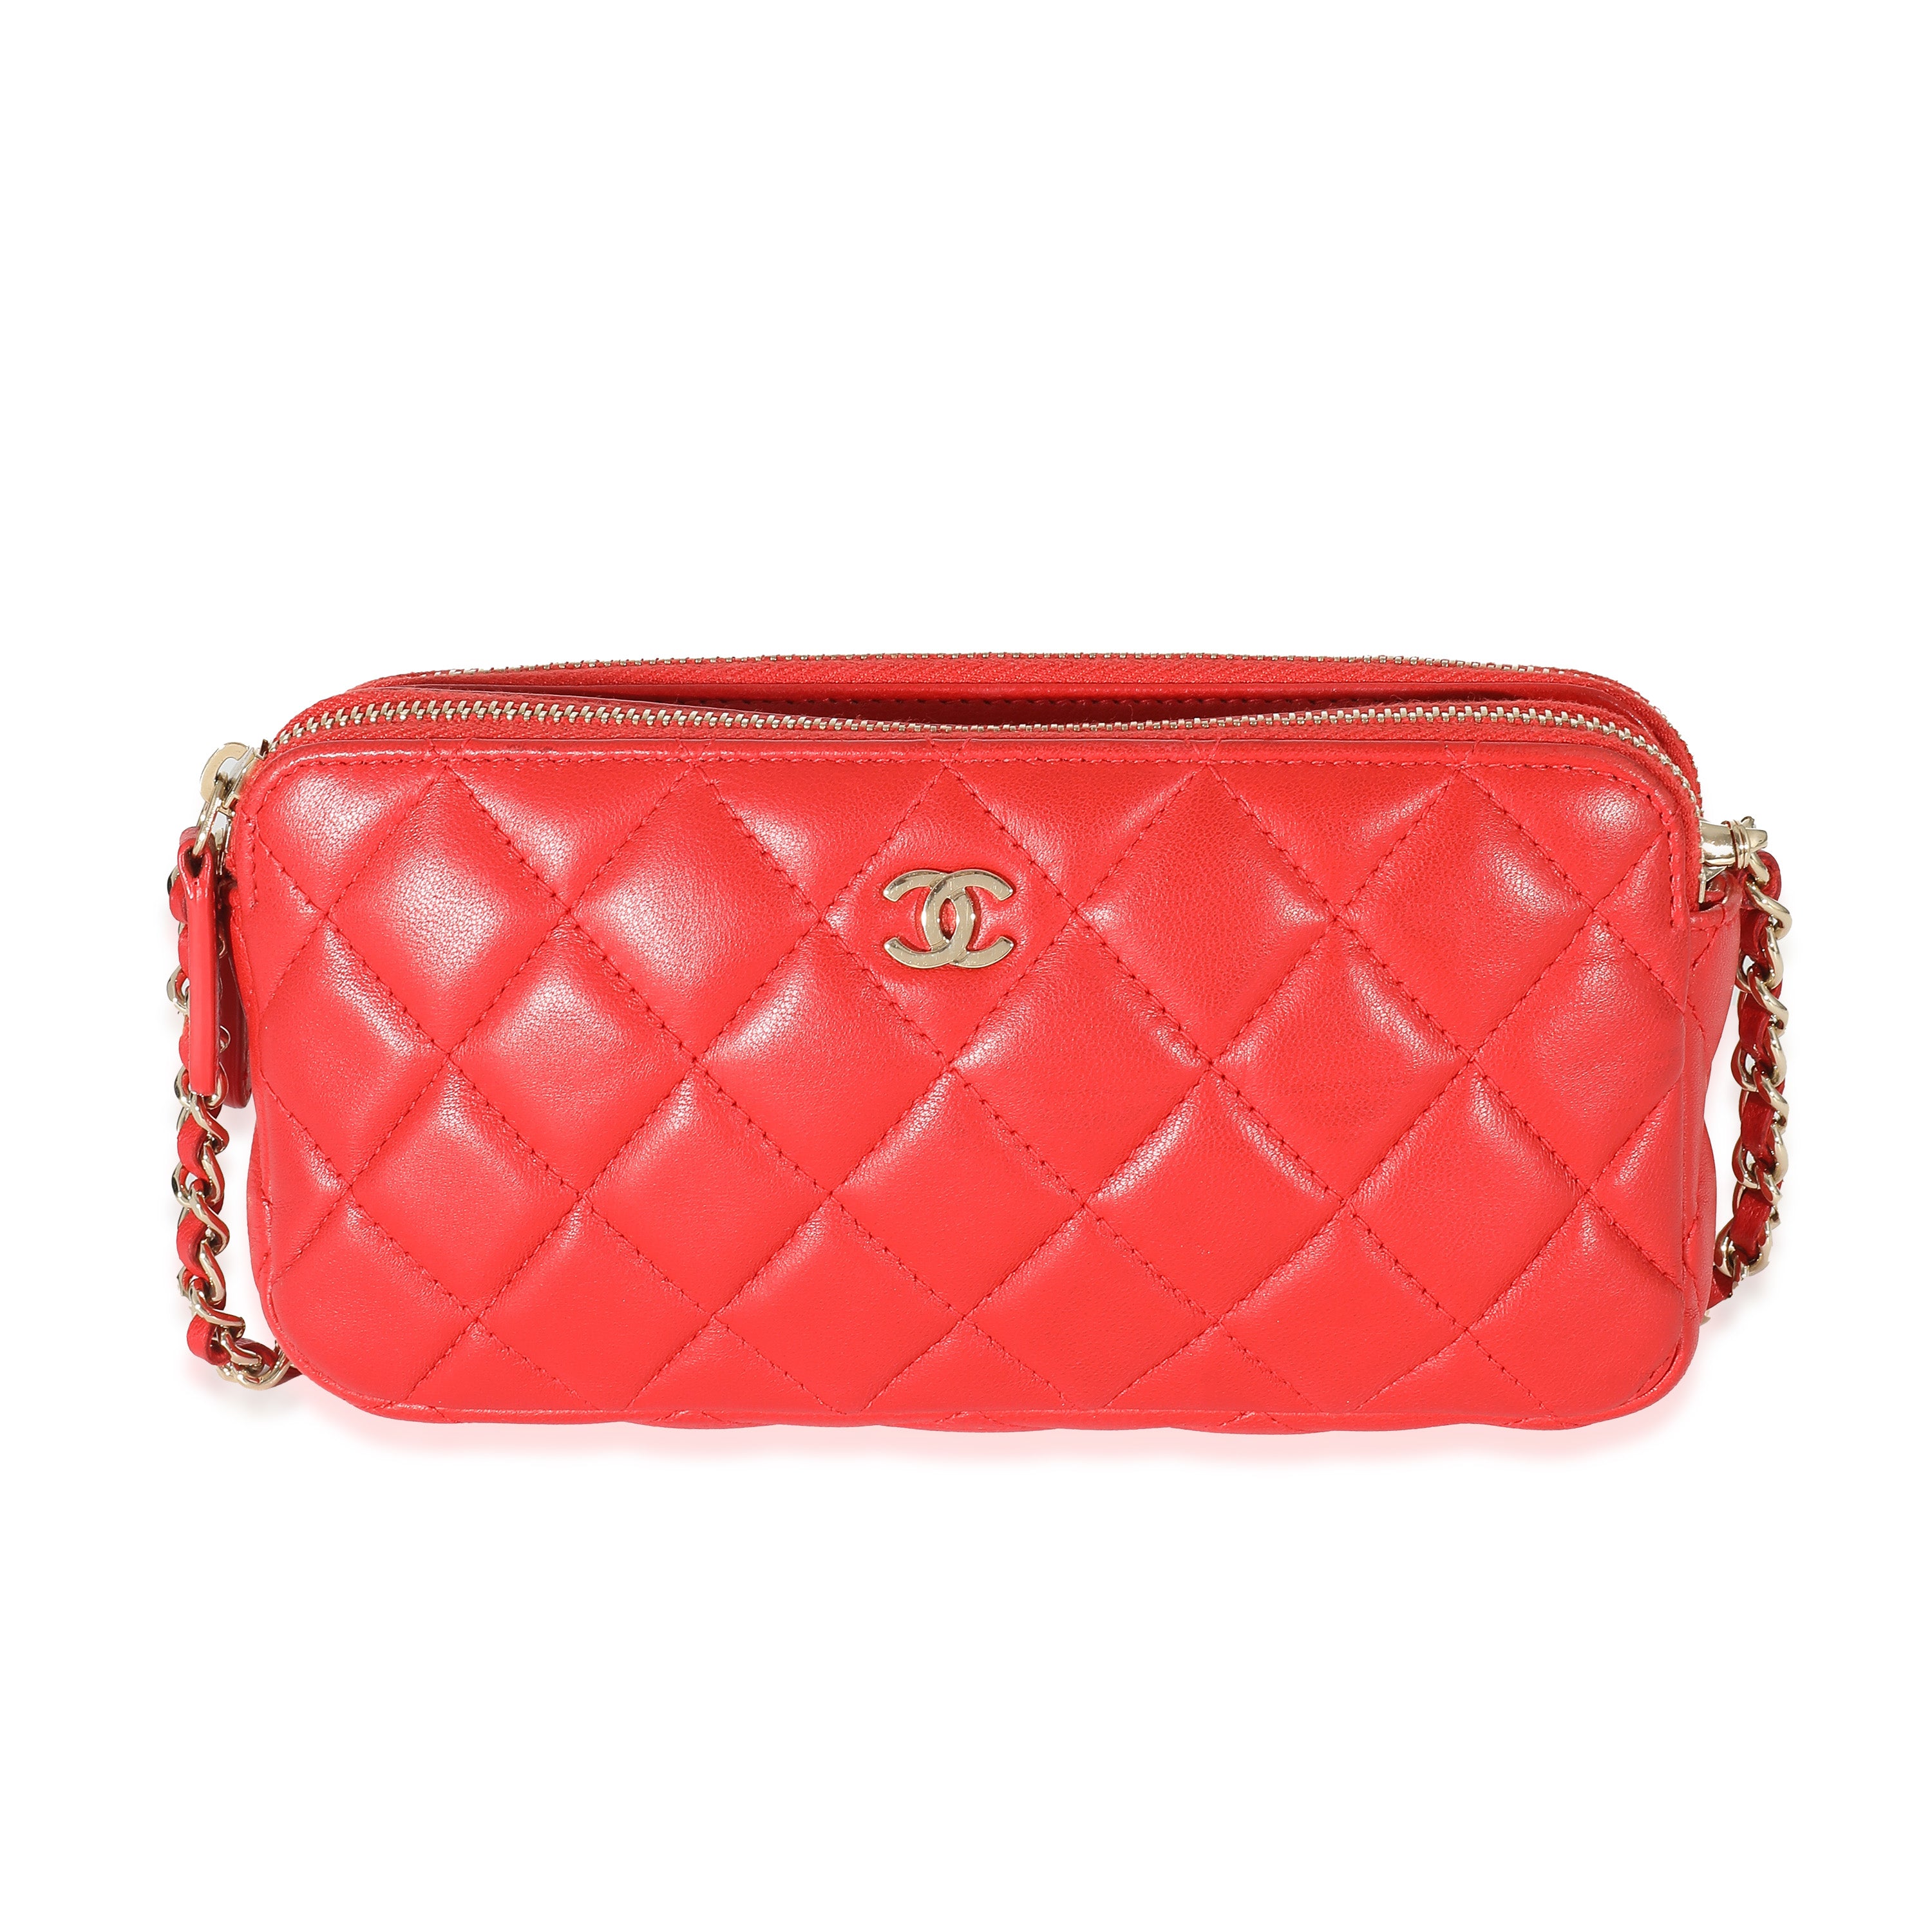 Chanel - Authenticated Boy Handbag - Leather Pink Plain for Women, Very Good Condition